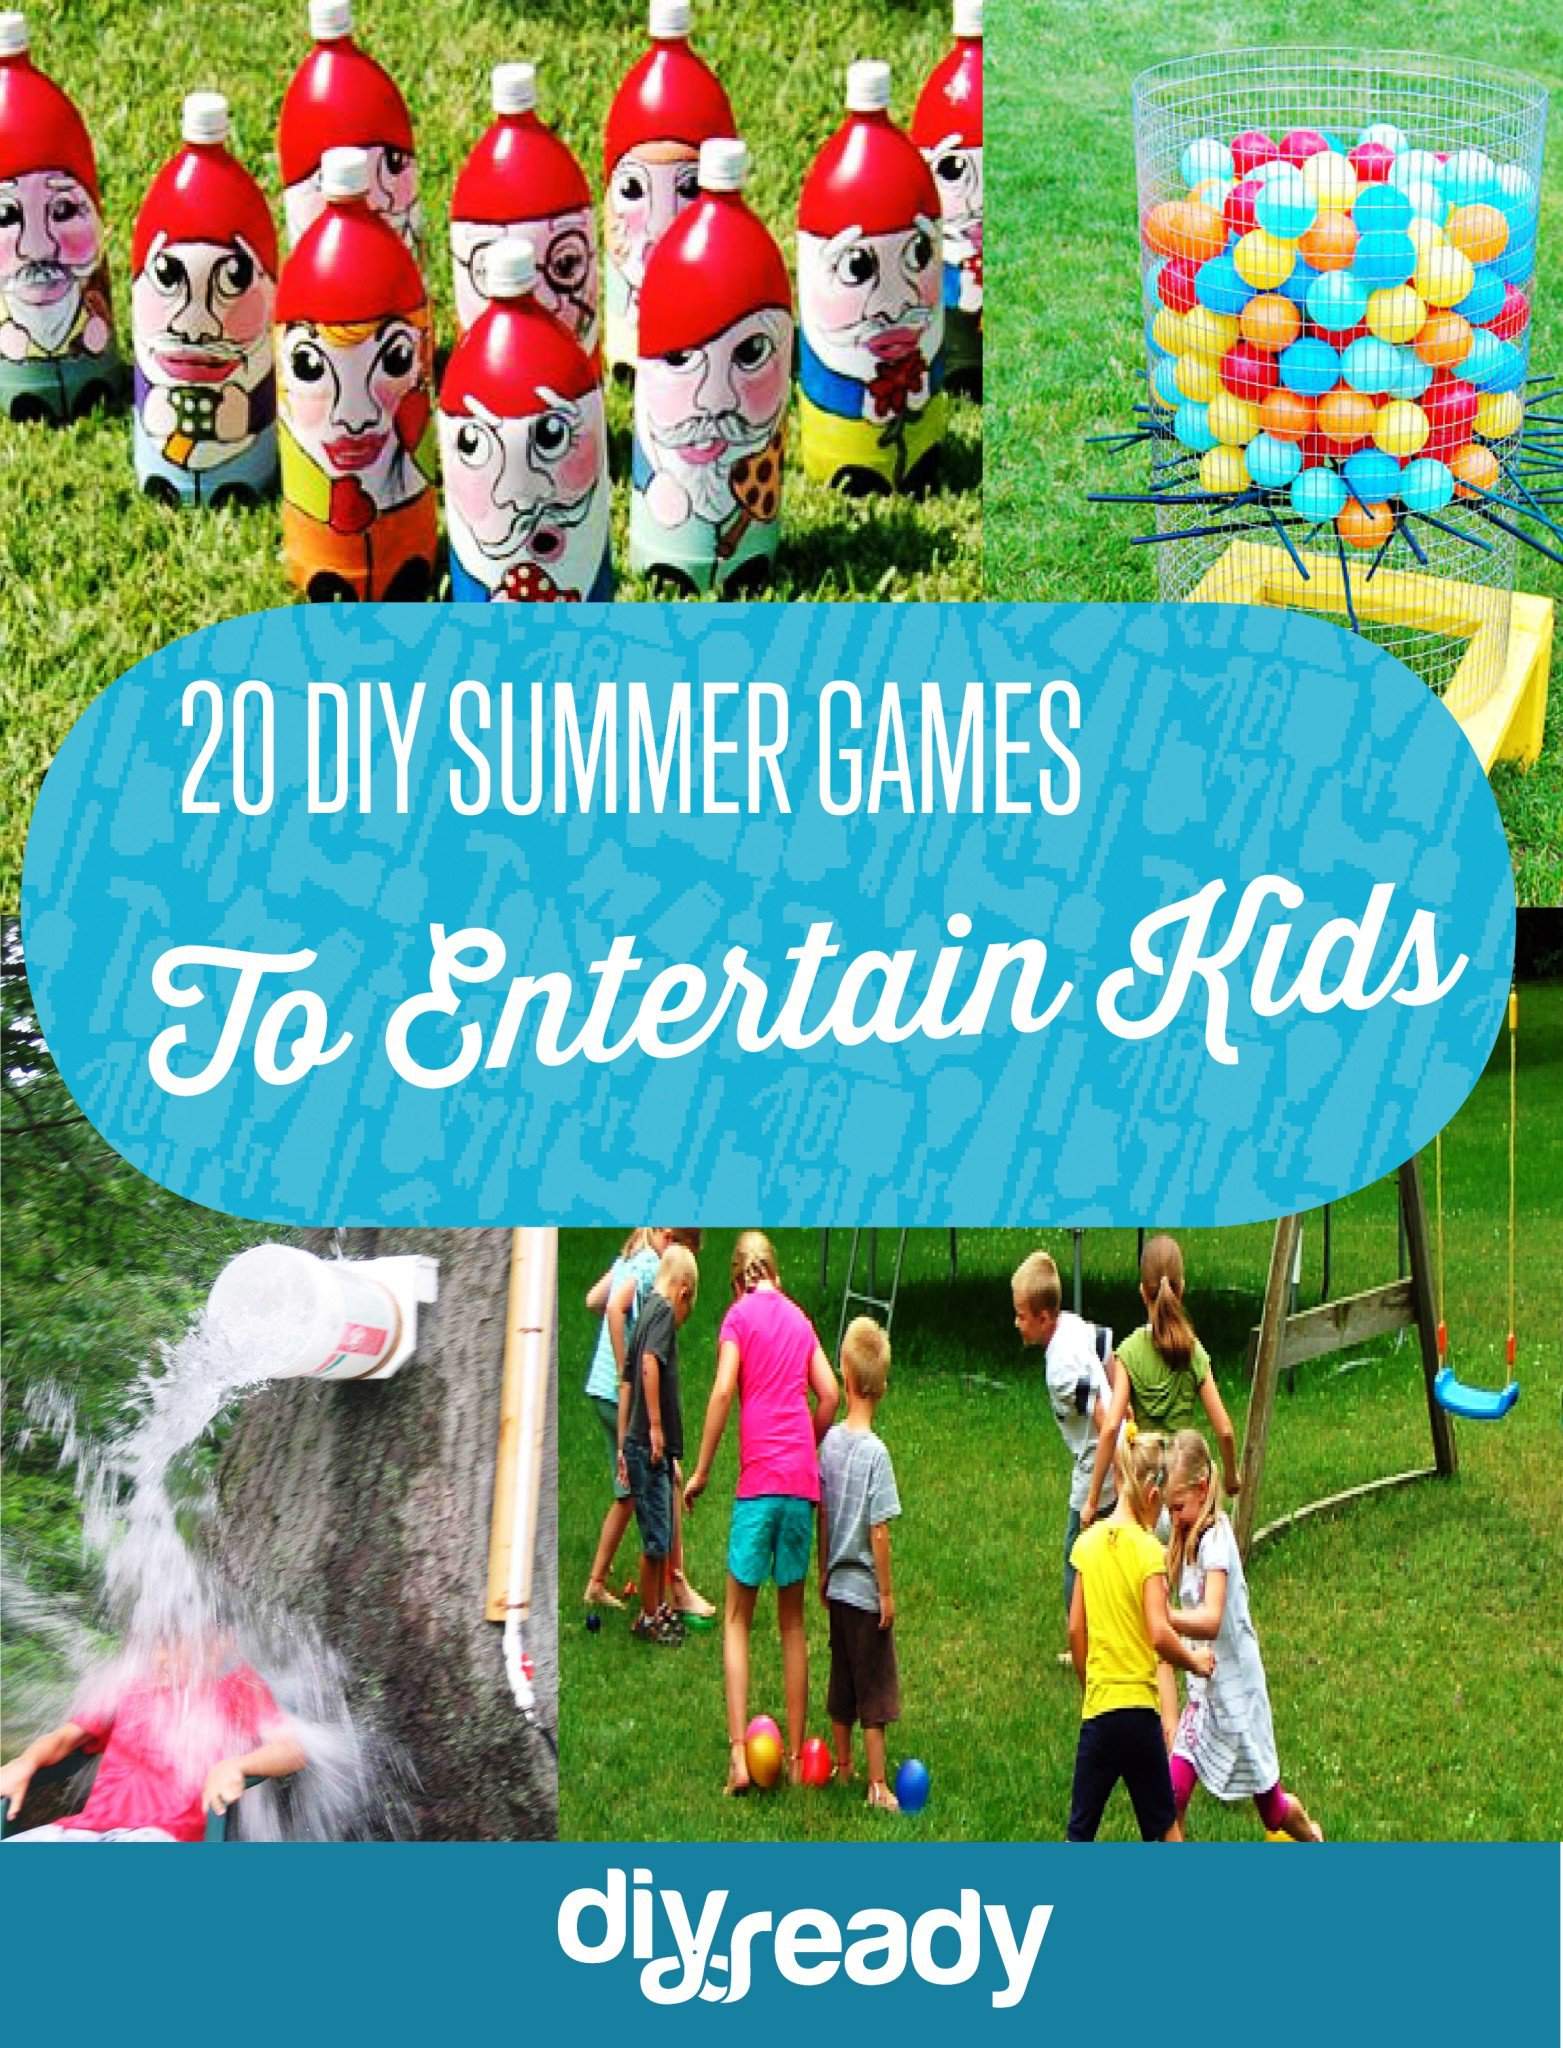 DIY Summer Games To Entertain Kids This Weekend | https://diyprojects.com/summer-games/